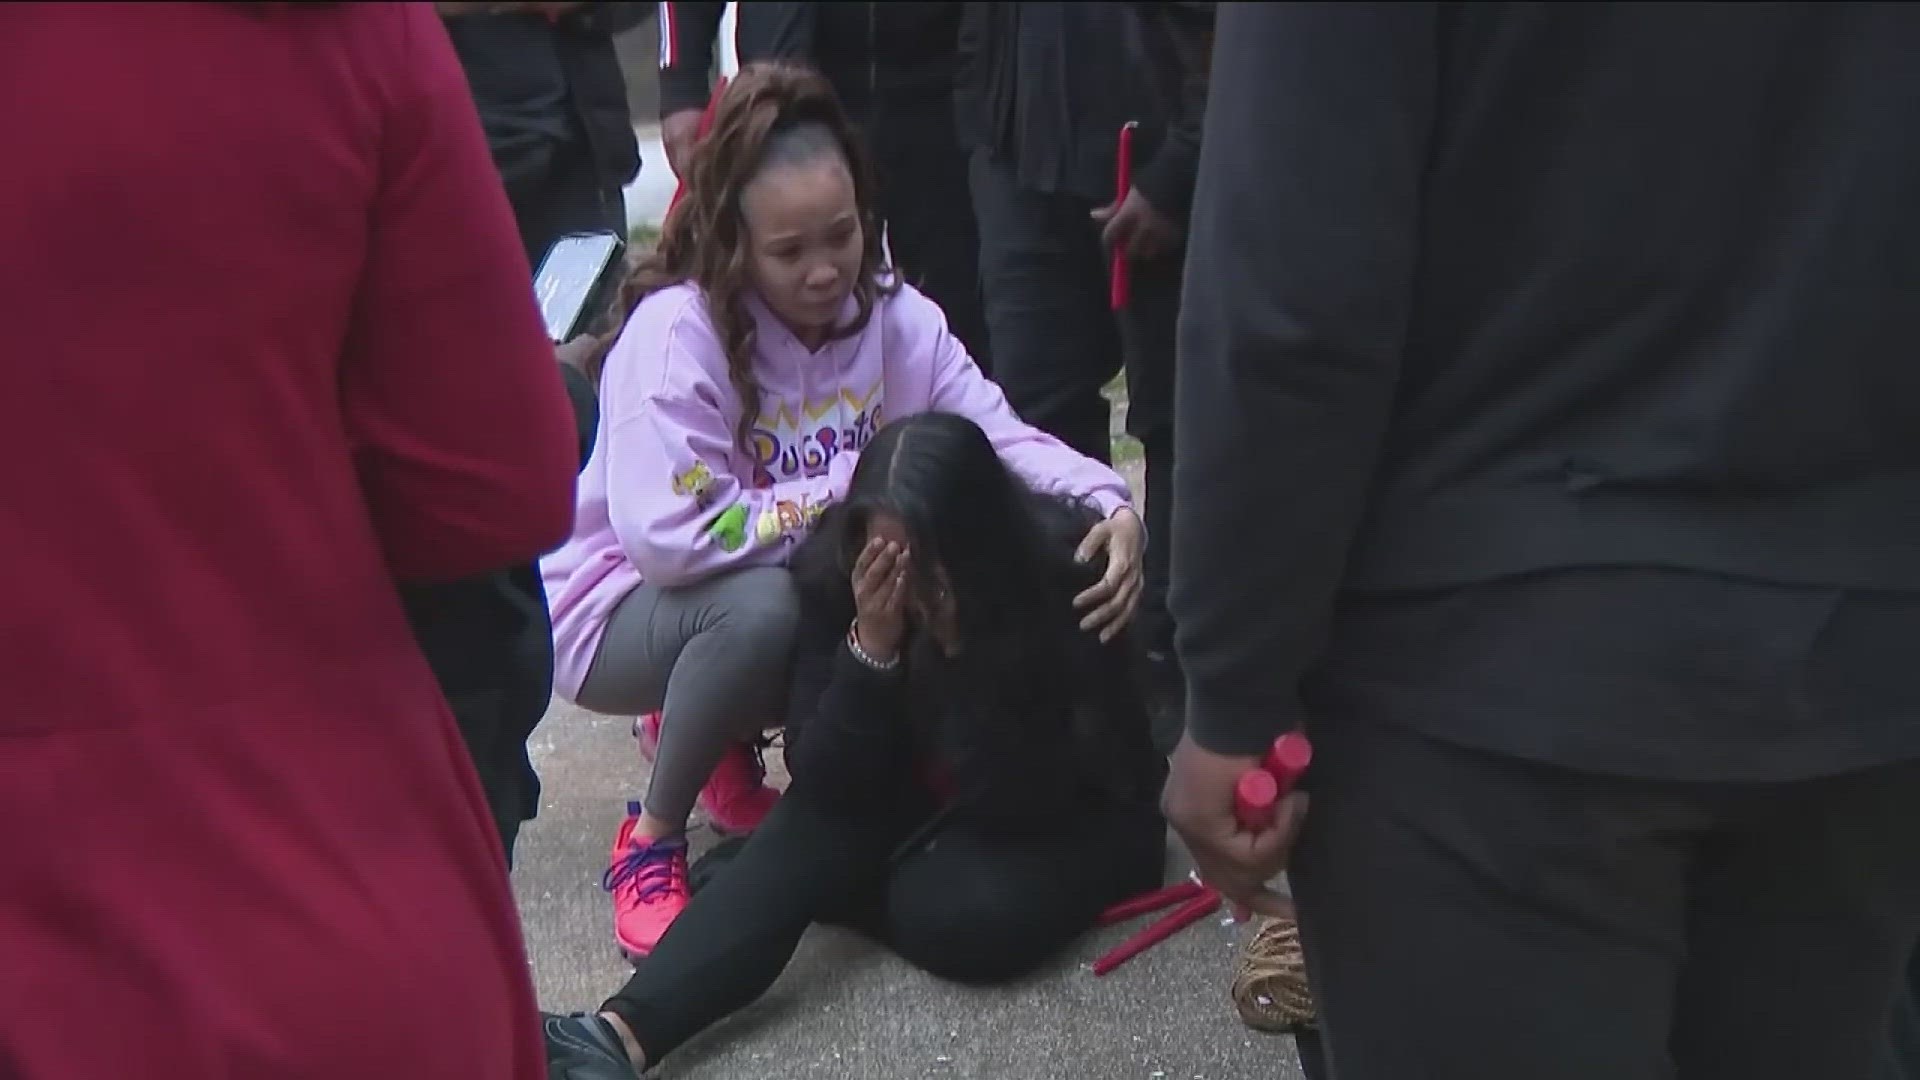 Members held a community prayer walk in honor of both Samuel Moon and Ajanaye Hill on Thursday afternoon, who were killed in Saturday's shooting.